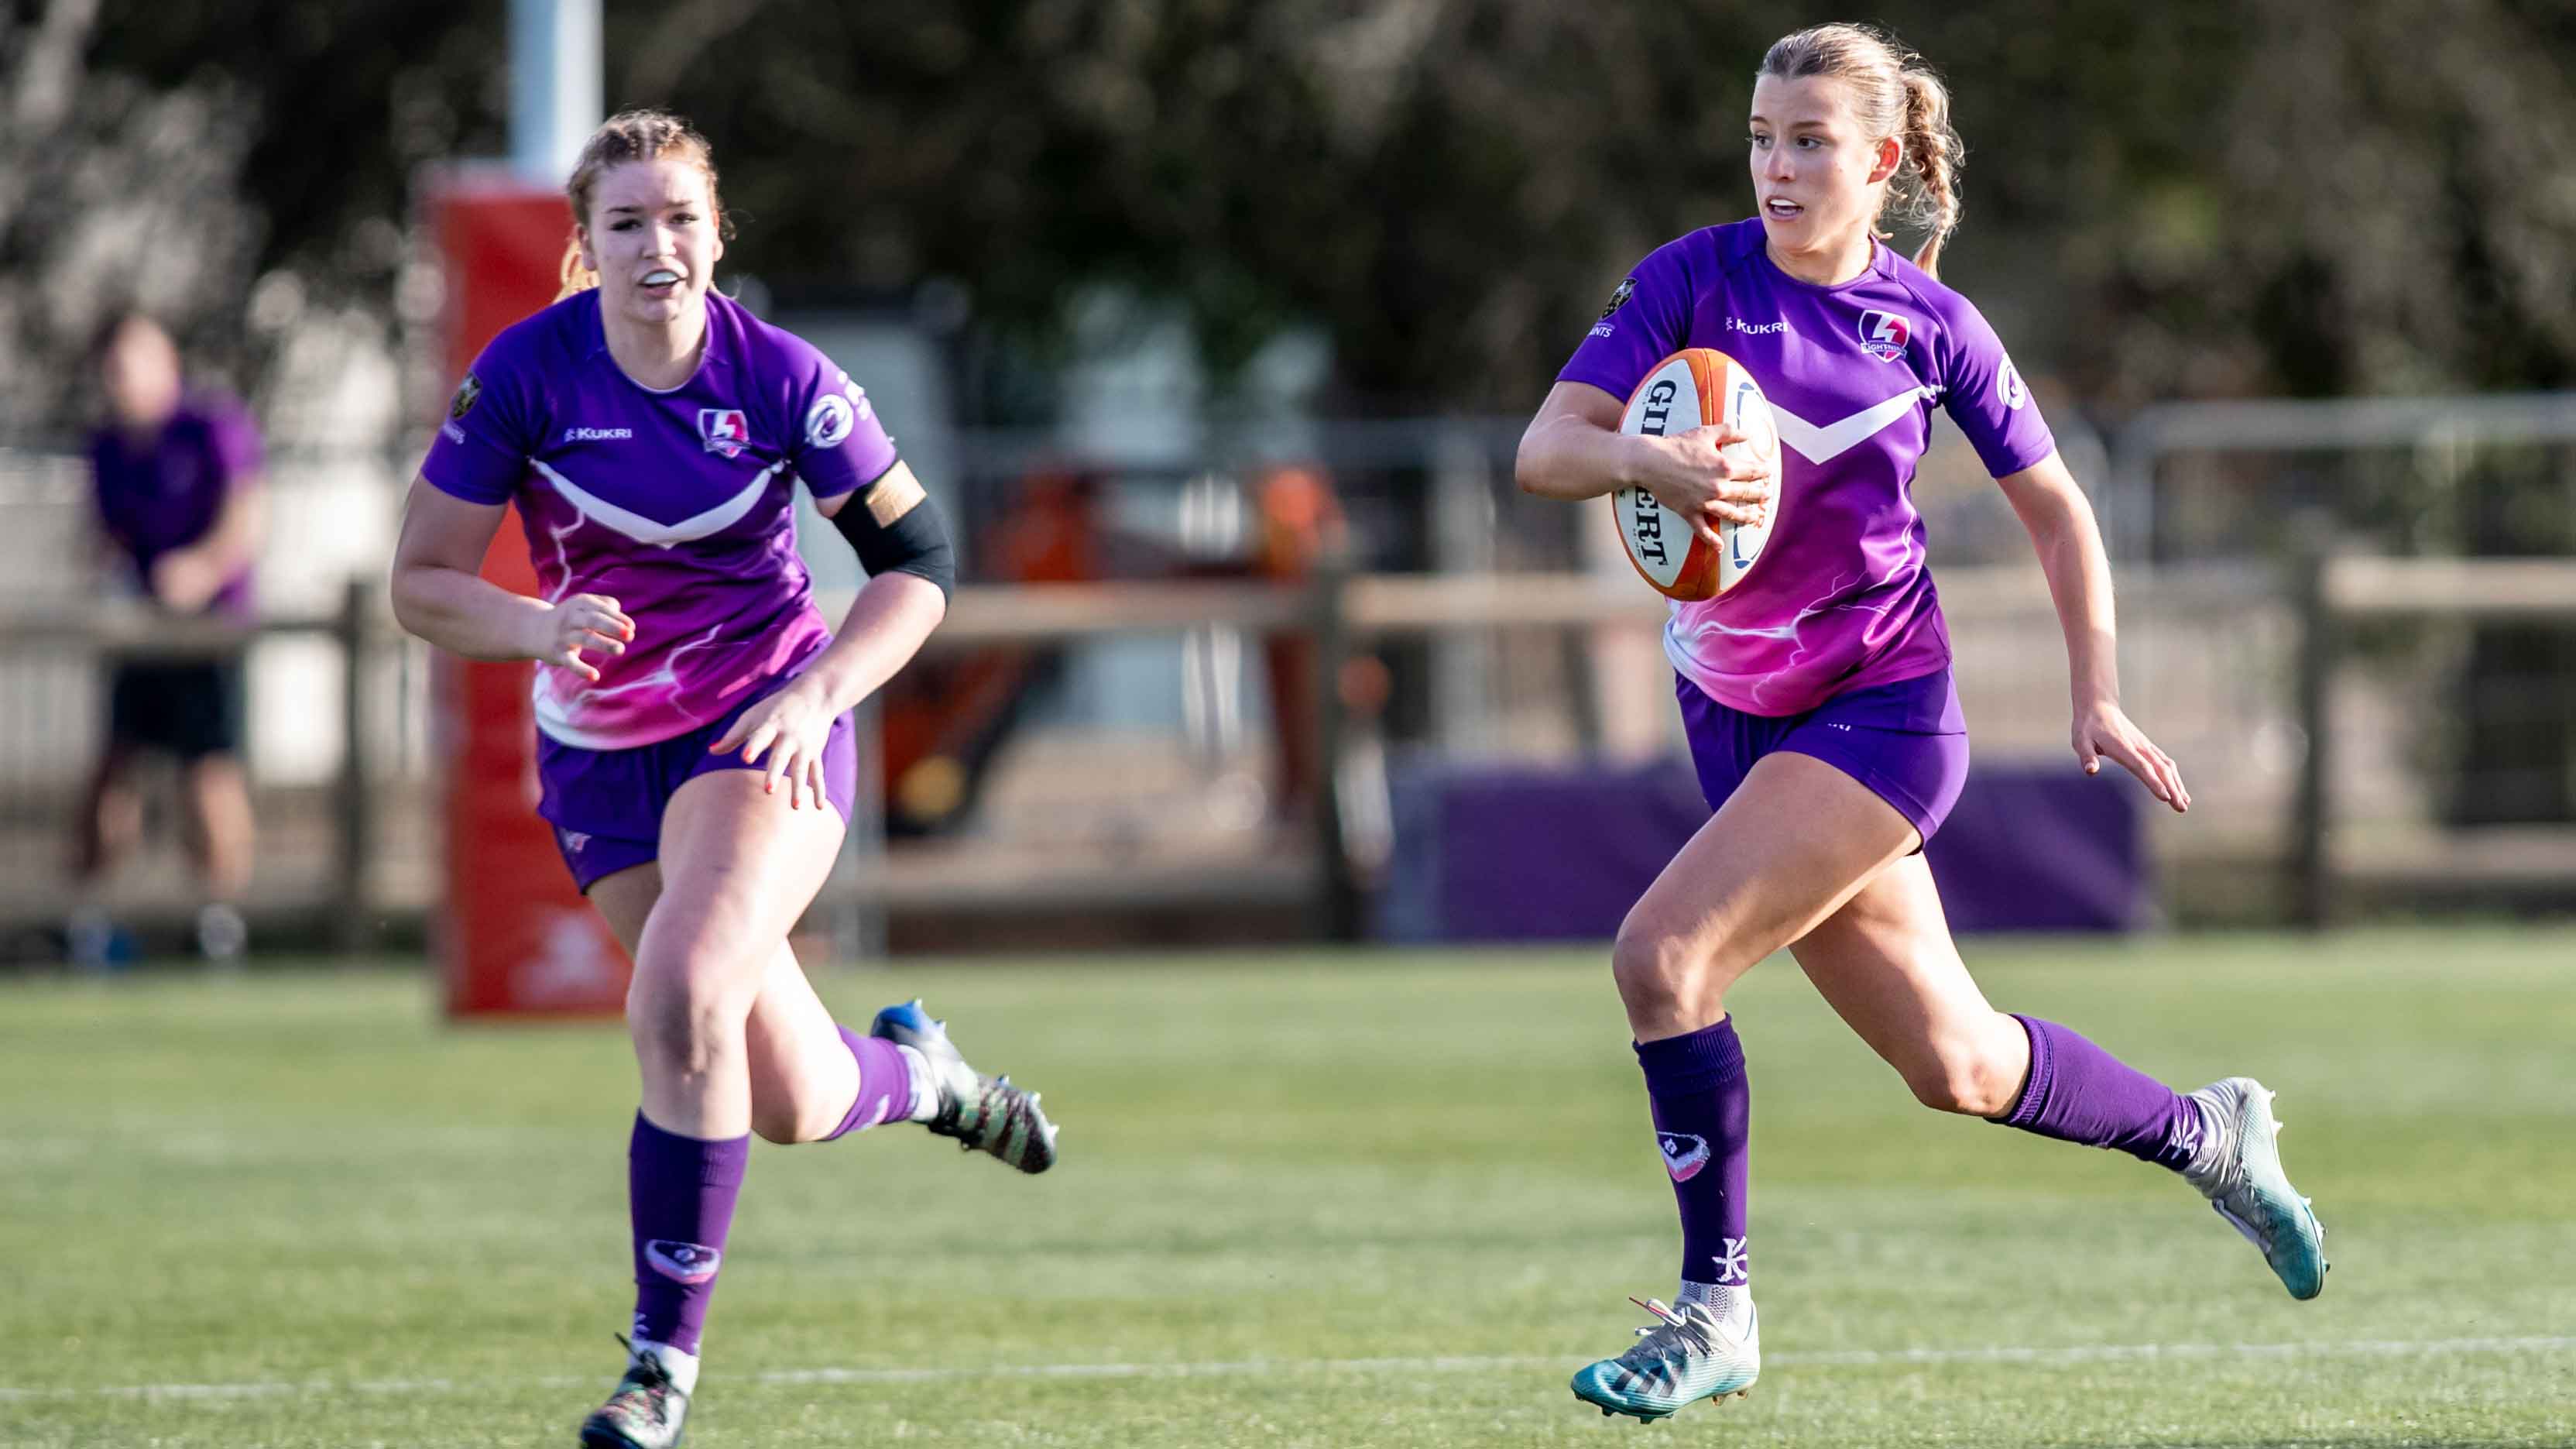 Two Lightning Rugby players in action on a game day.